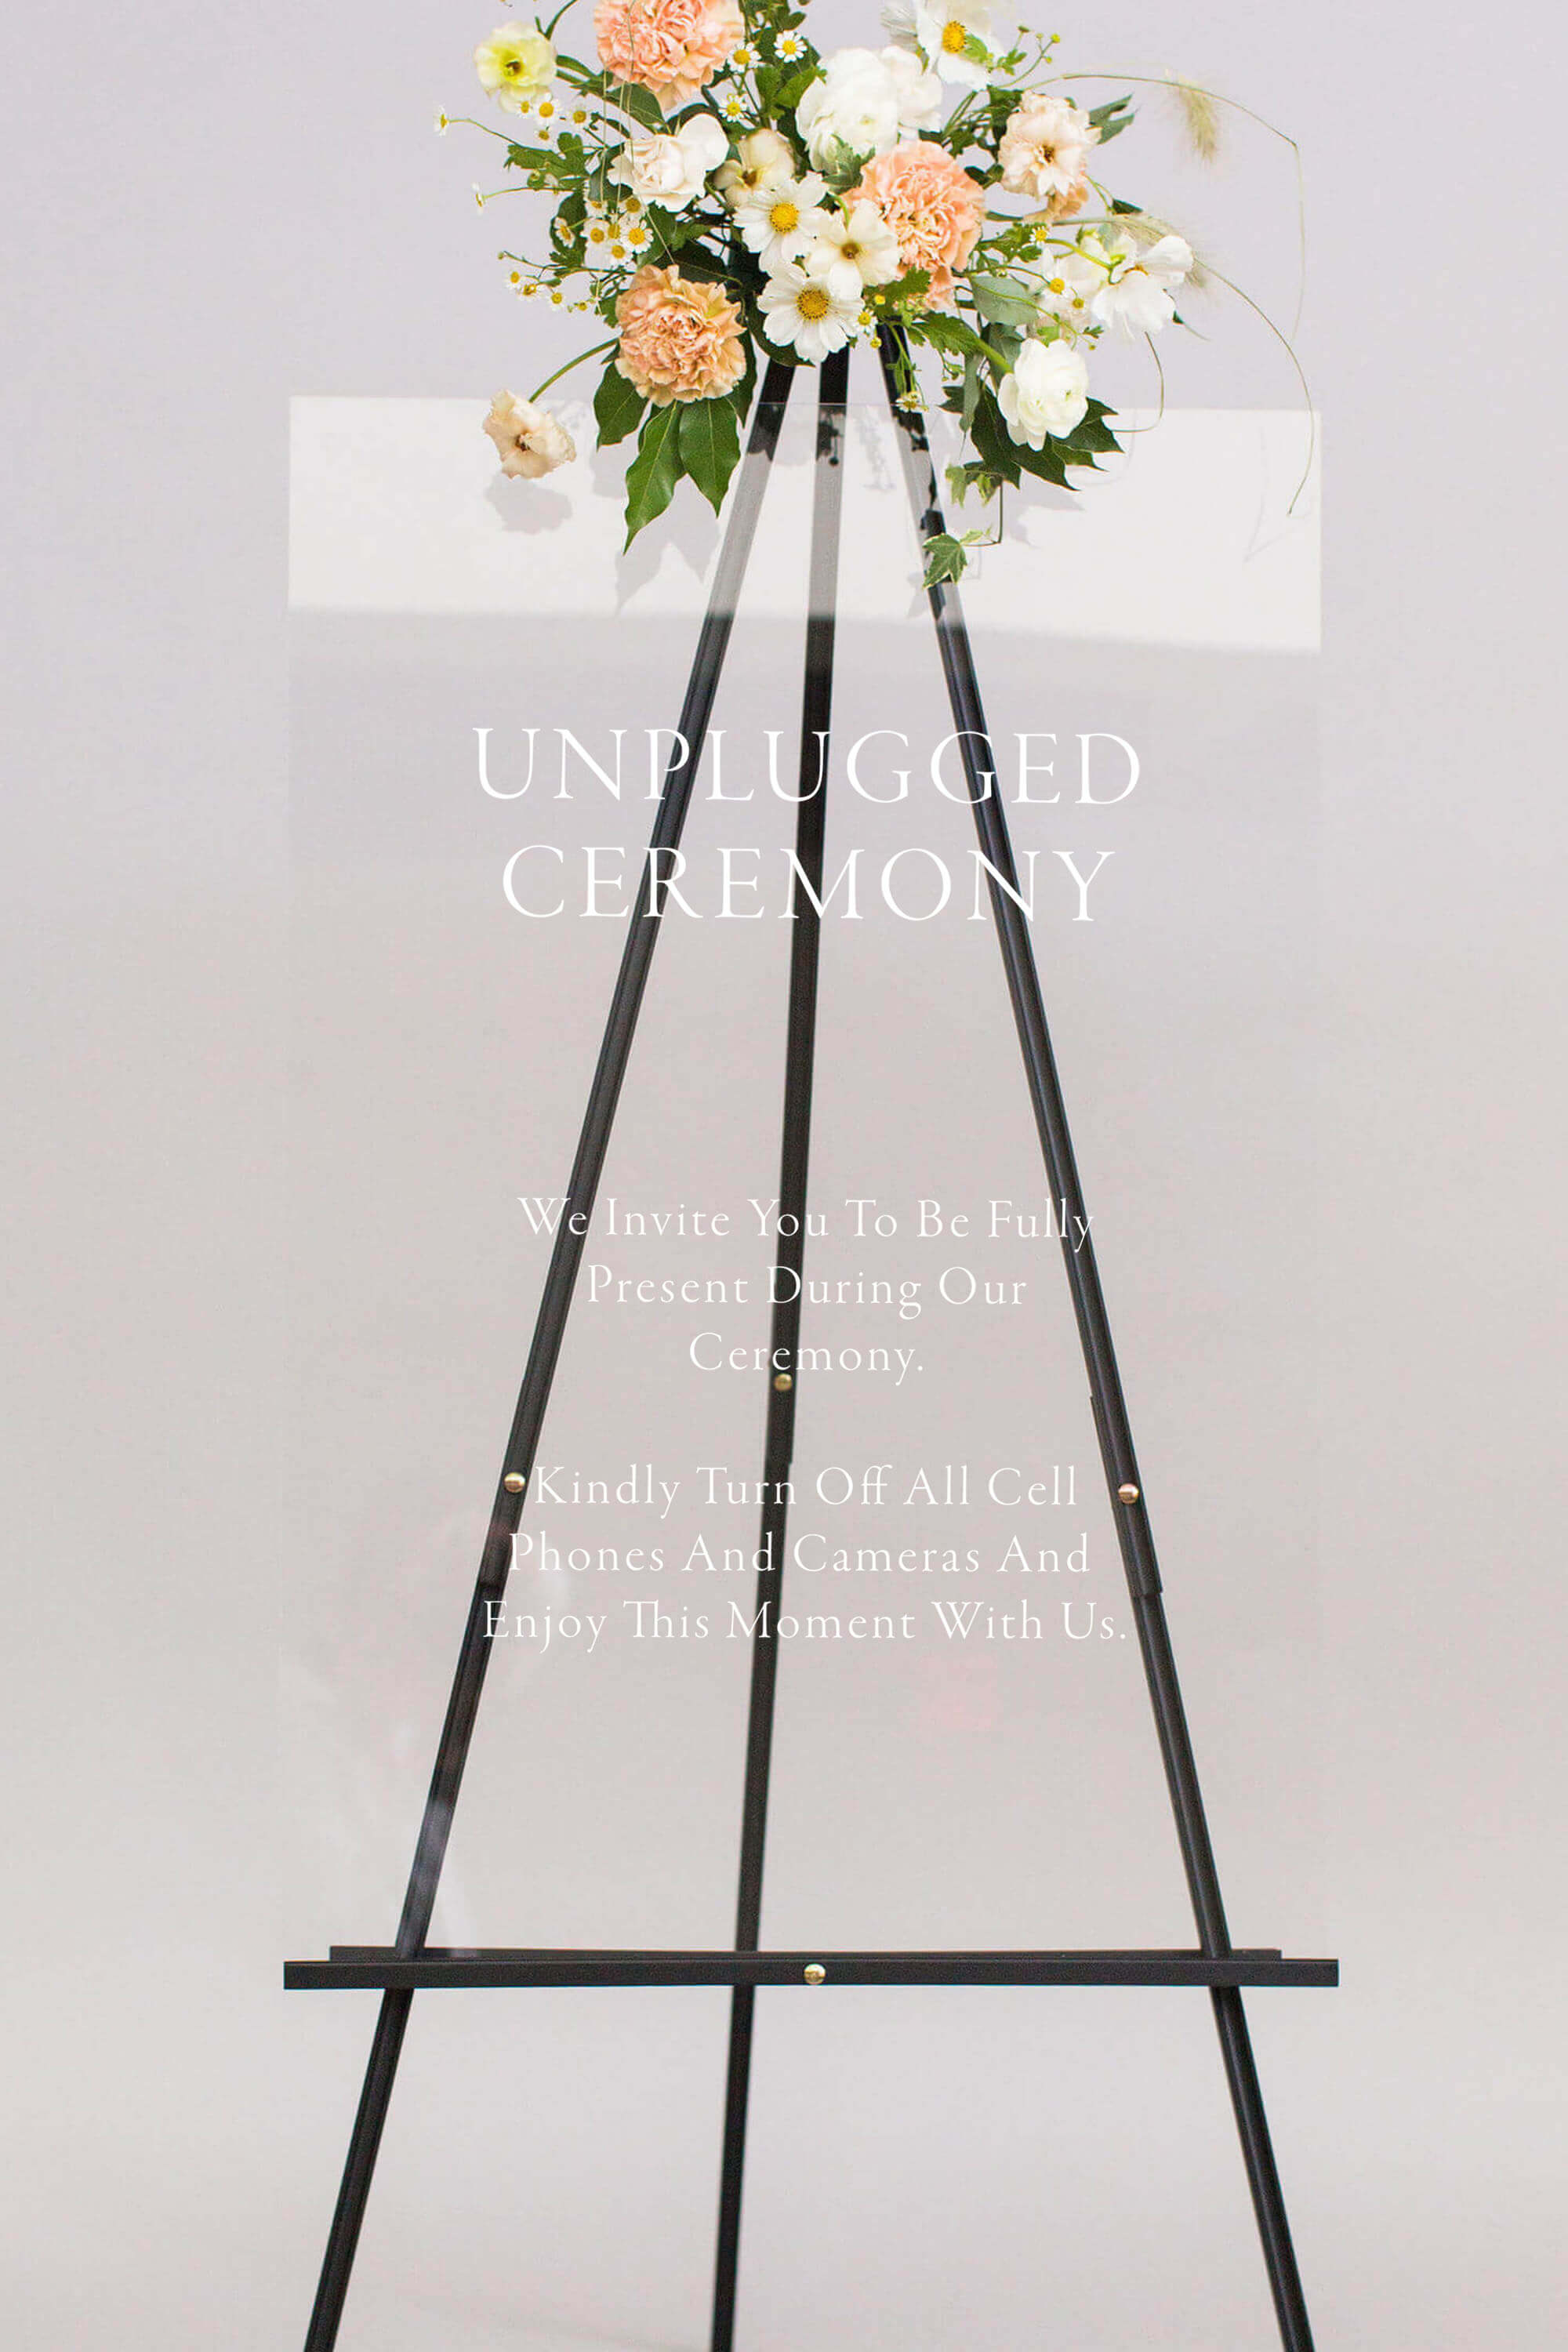 Glass Unplugged Wedding Ceremony Sign Acrylic Lily Roe Co.